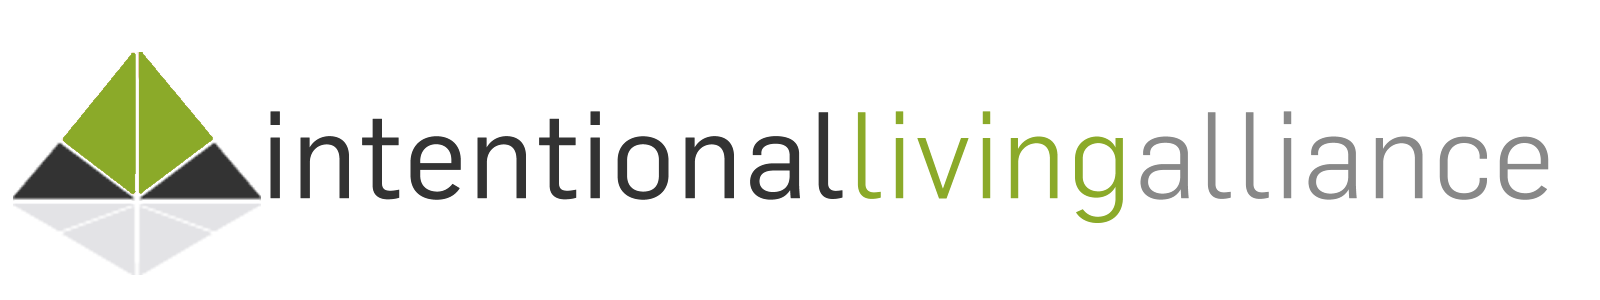 Intentional Living Alliance